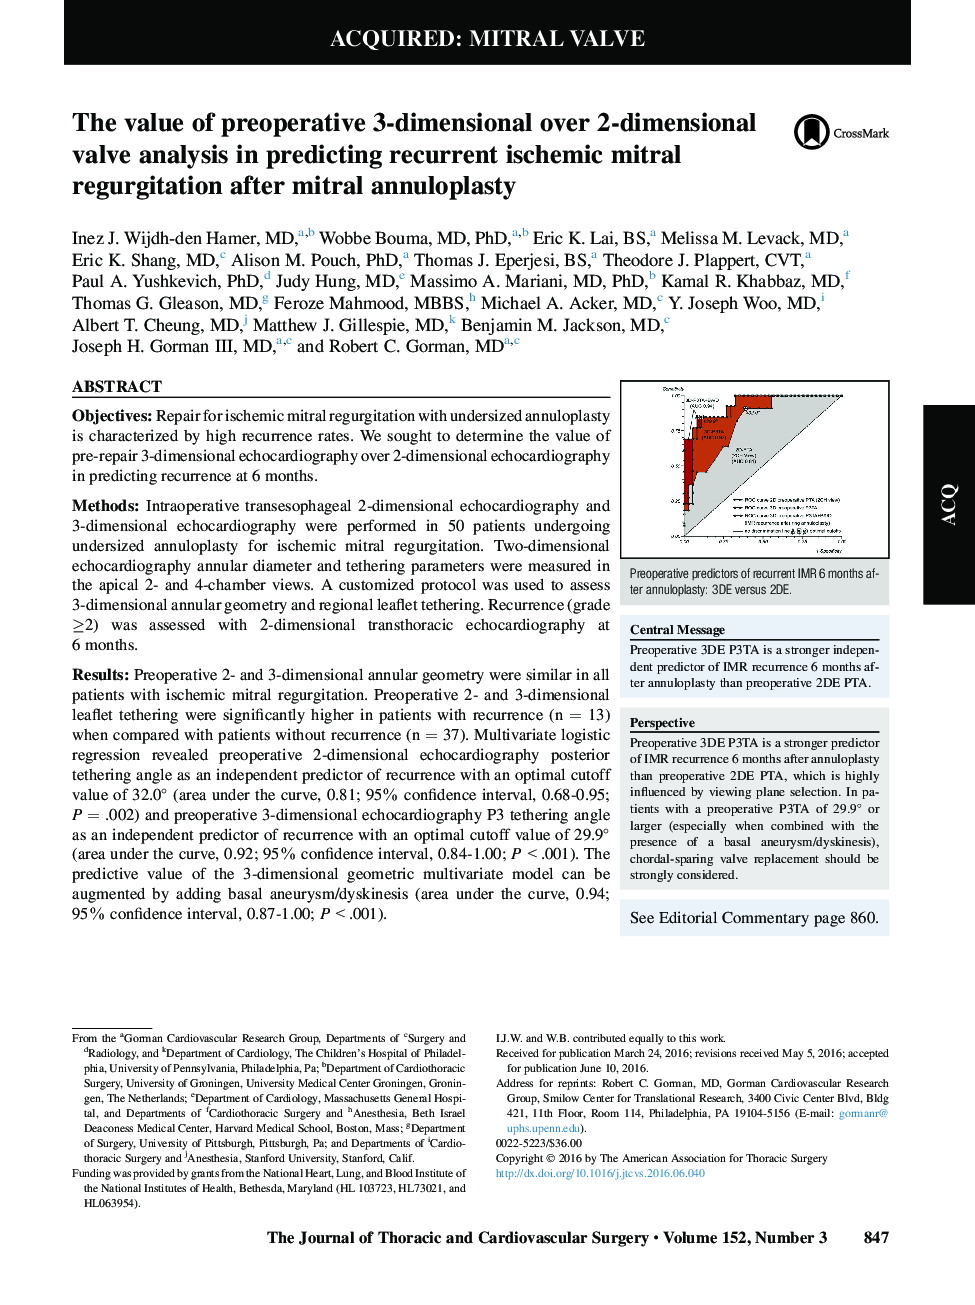 The value of preoperative 3-dimensional over 2-dimensional valve analysis in predicting recurrent ischemic mitral regurgitation after mitral annuloplasty 